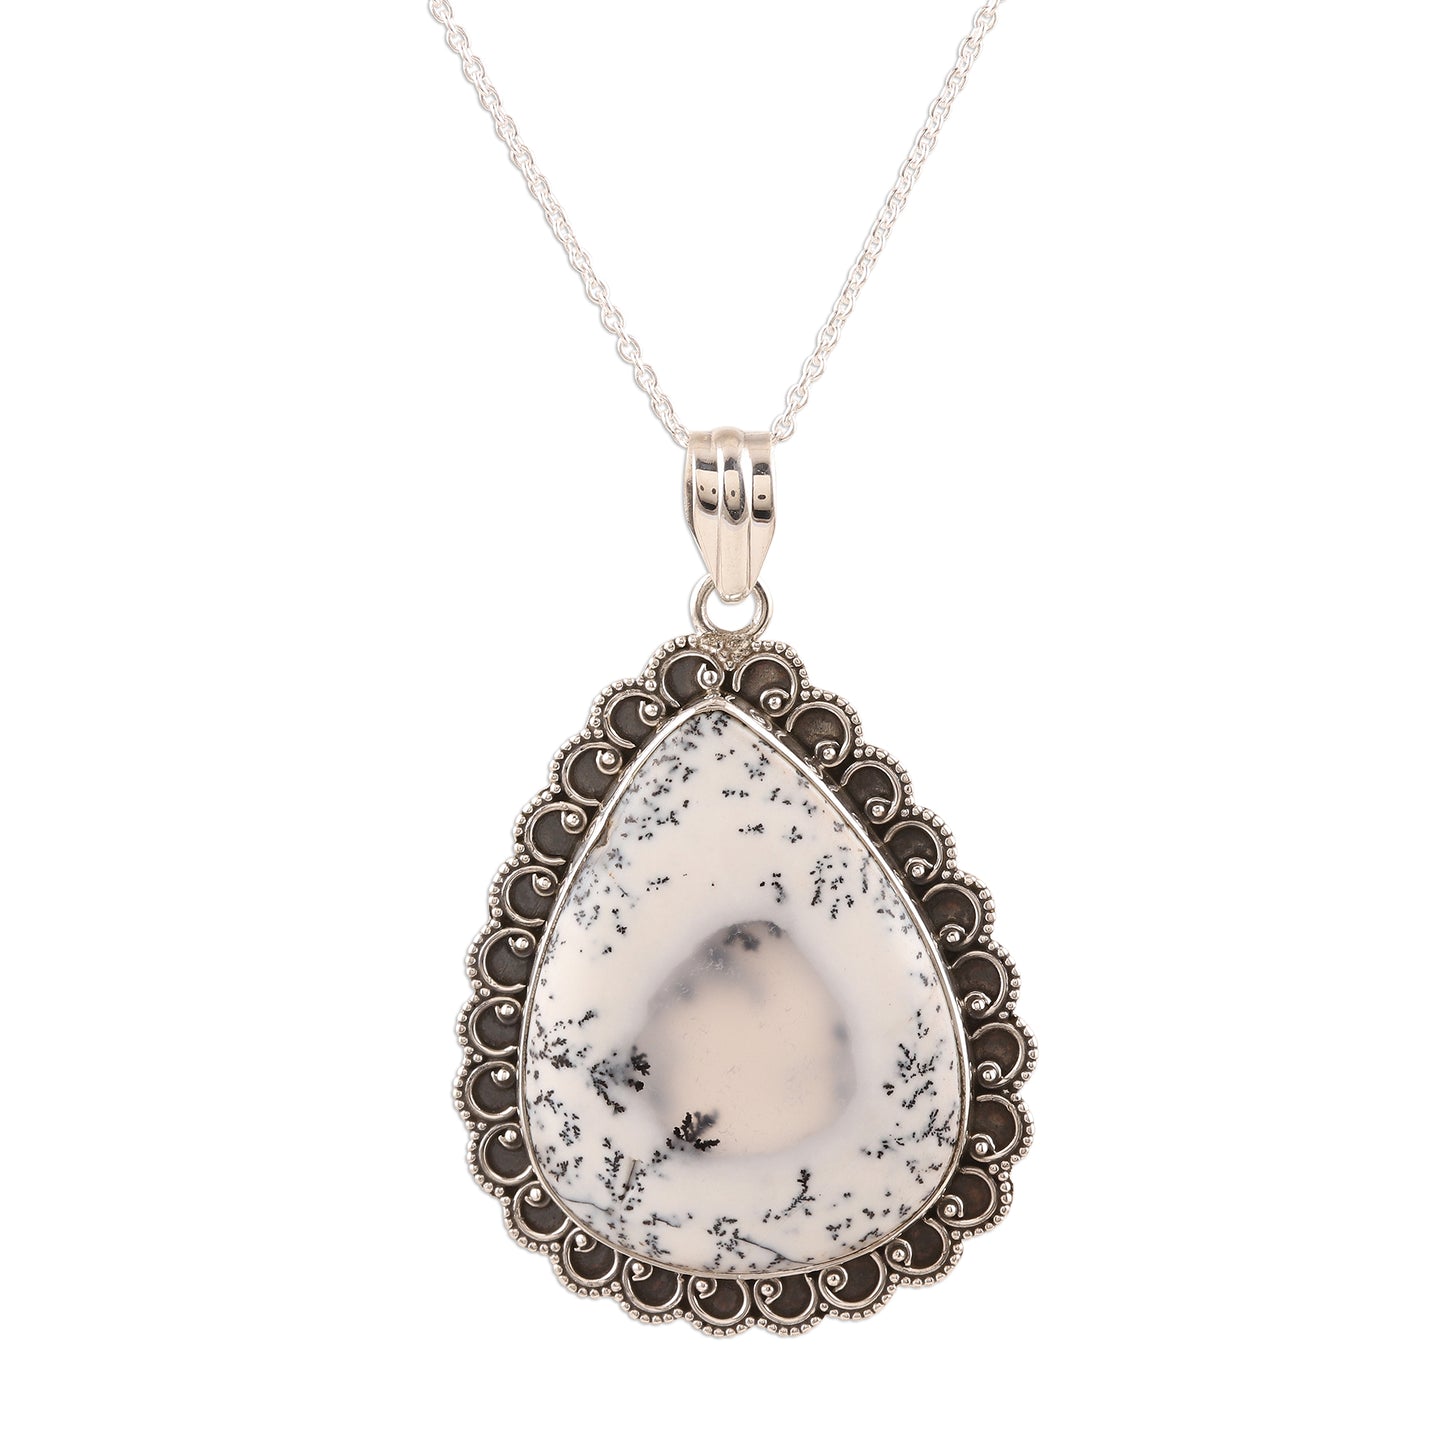 Gathering Storm Dendritic Opal and Sterling Silver Pendant Necklace